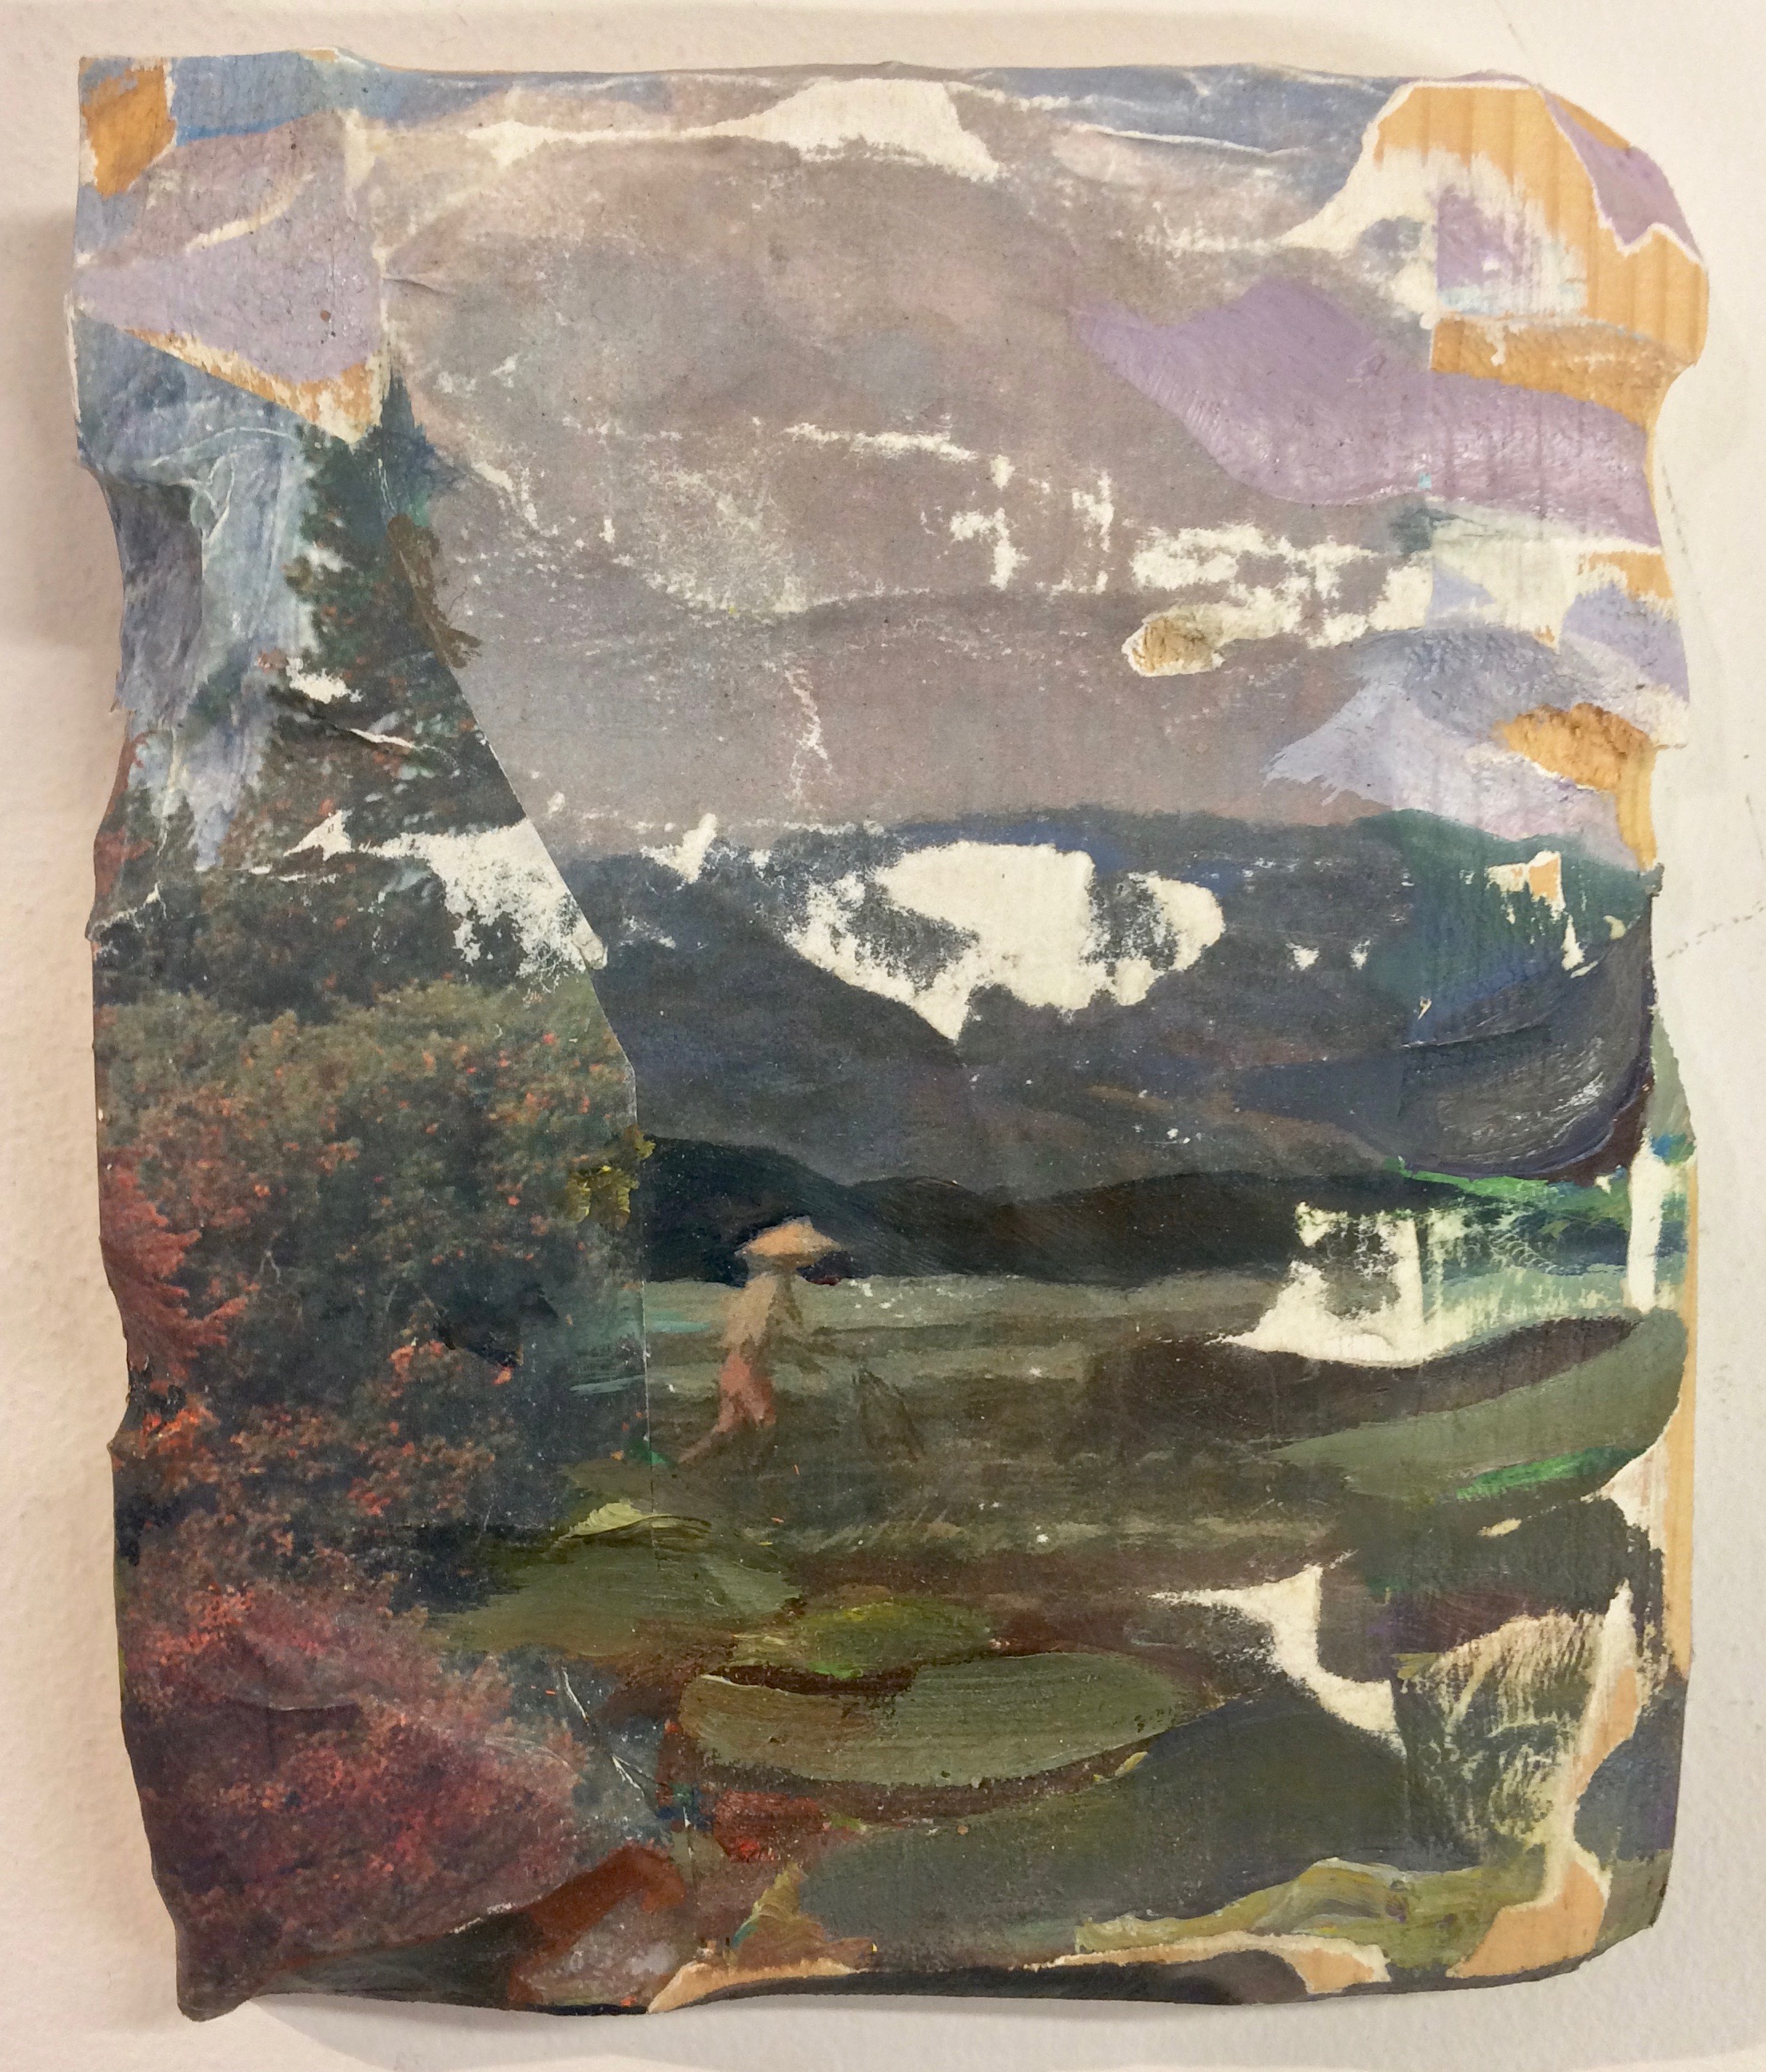   Field , 2016, oil, Fernando Amorsolo postcard and nature calendars on carved wood,&nbsp;8 x 6 inches 